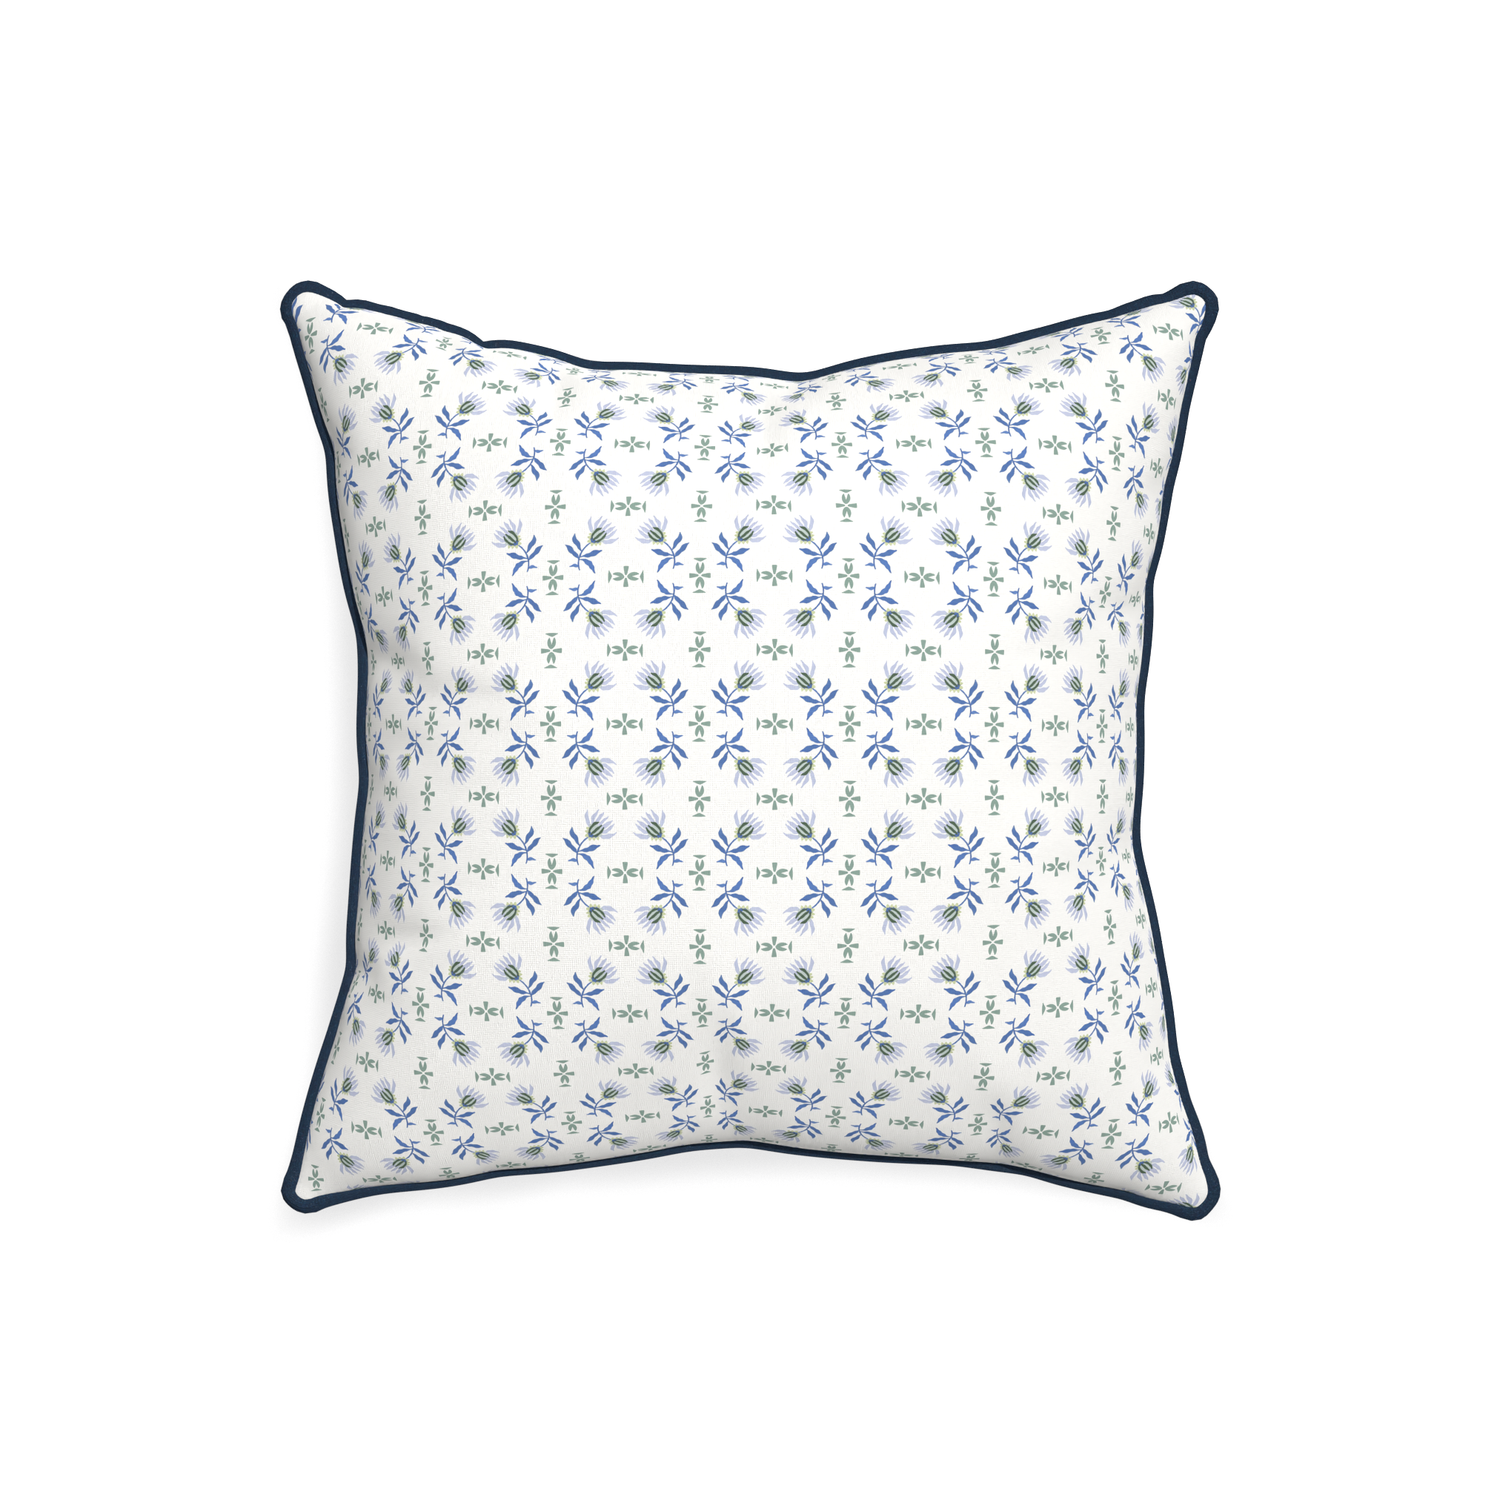 20-square lee custom blue & green floralpillow with c piping on white background